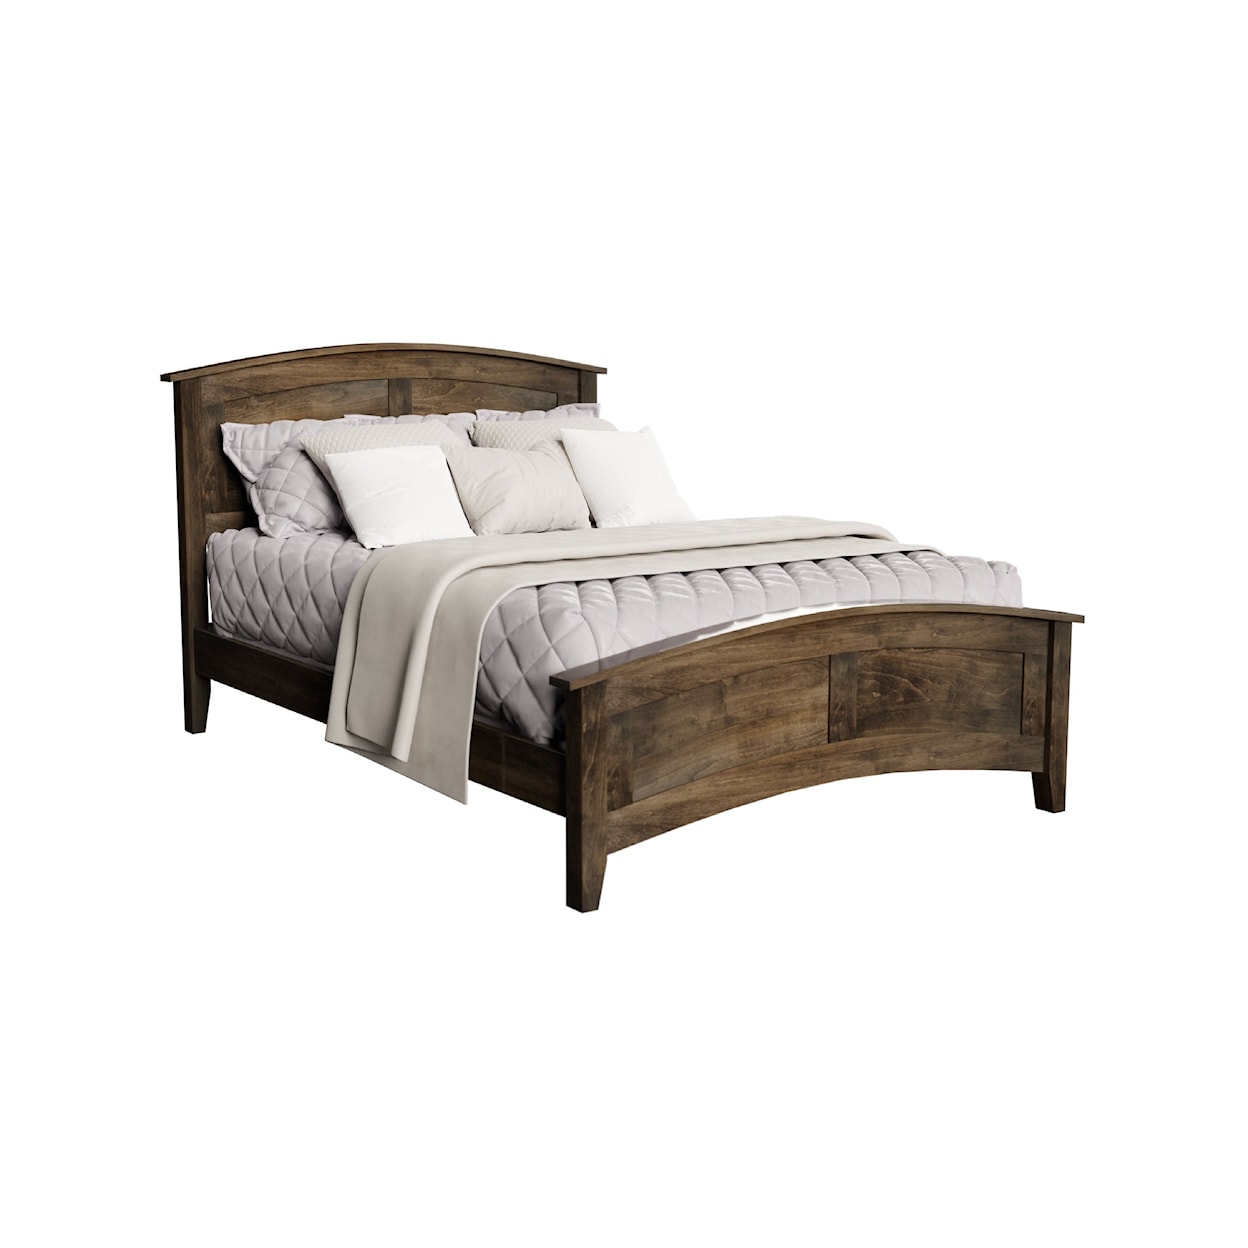 Dover Road Wyandot Queen Arched Panel Headboard